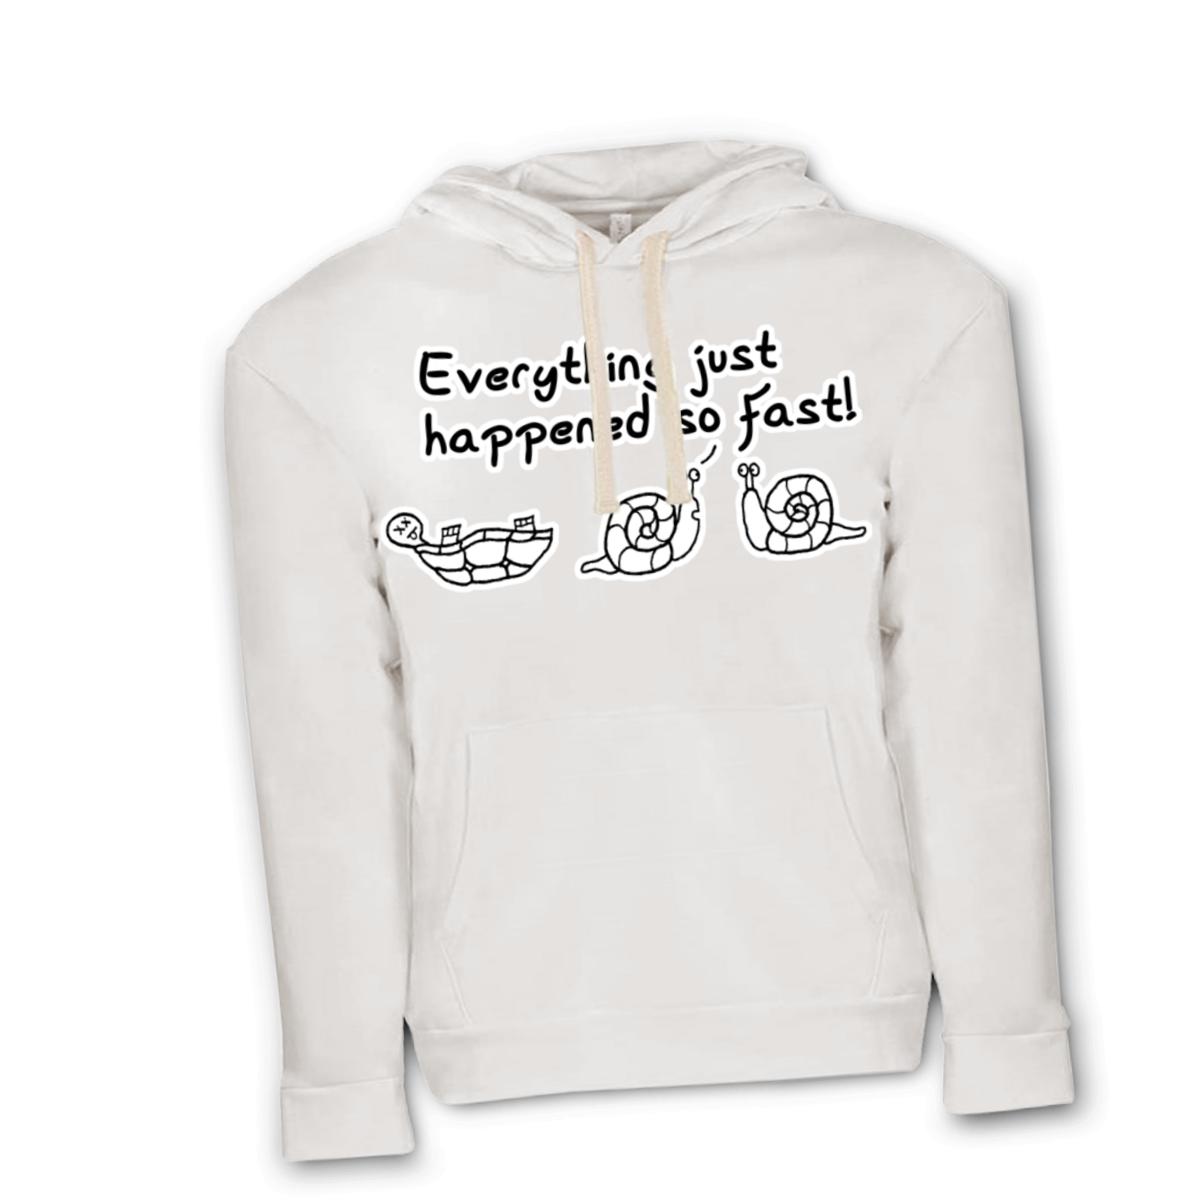 Happened So Fast Unisex Pullover Hoodie Large white